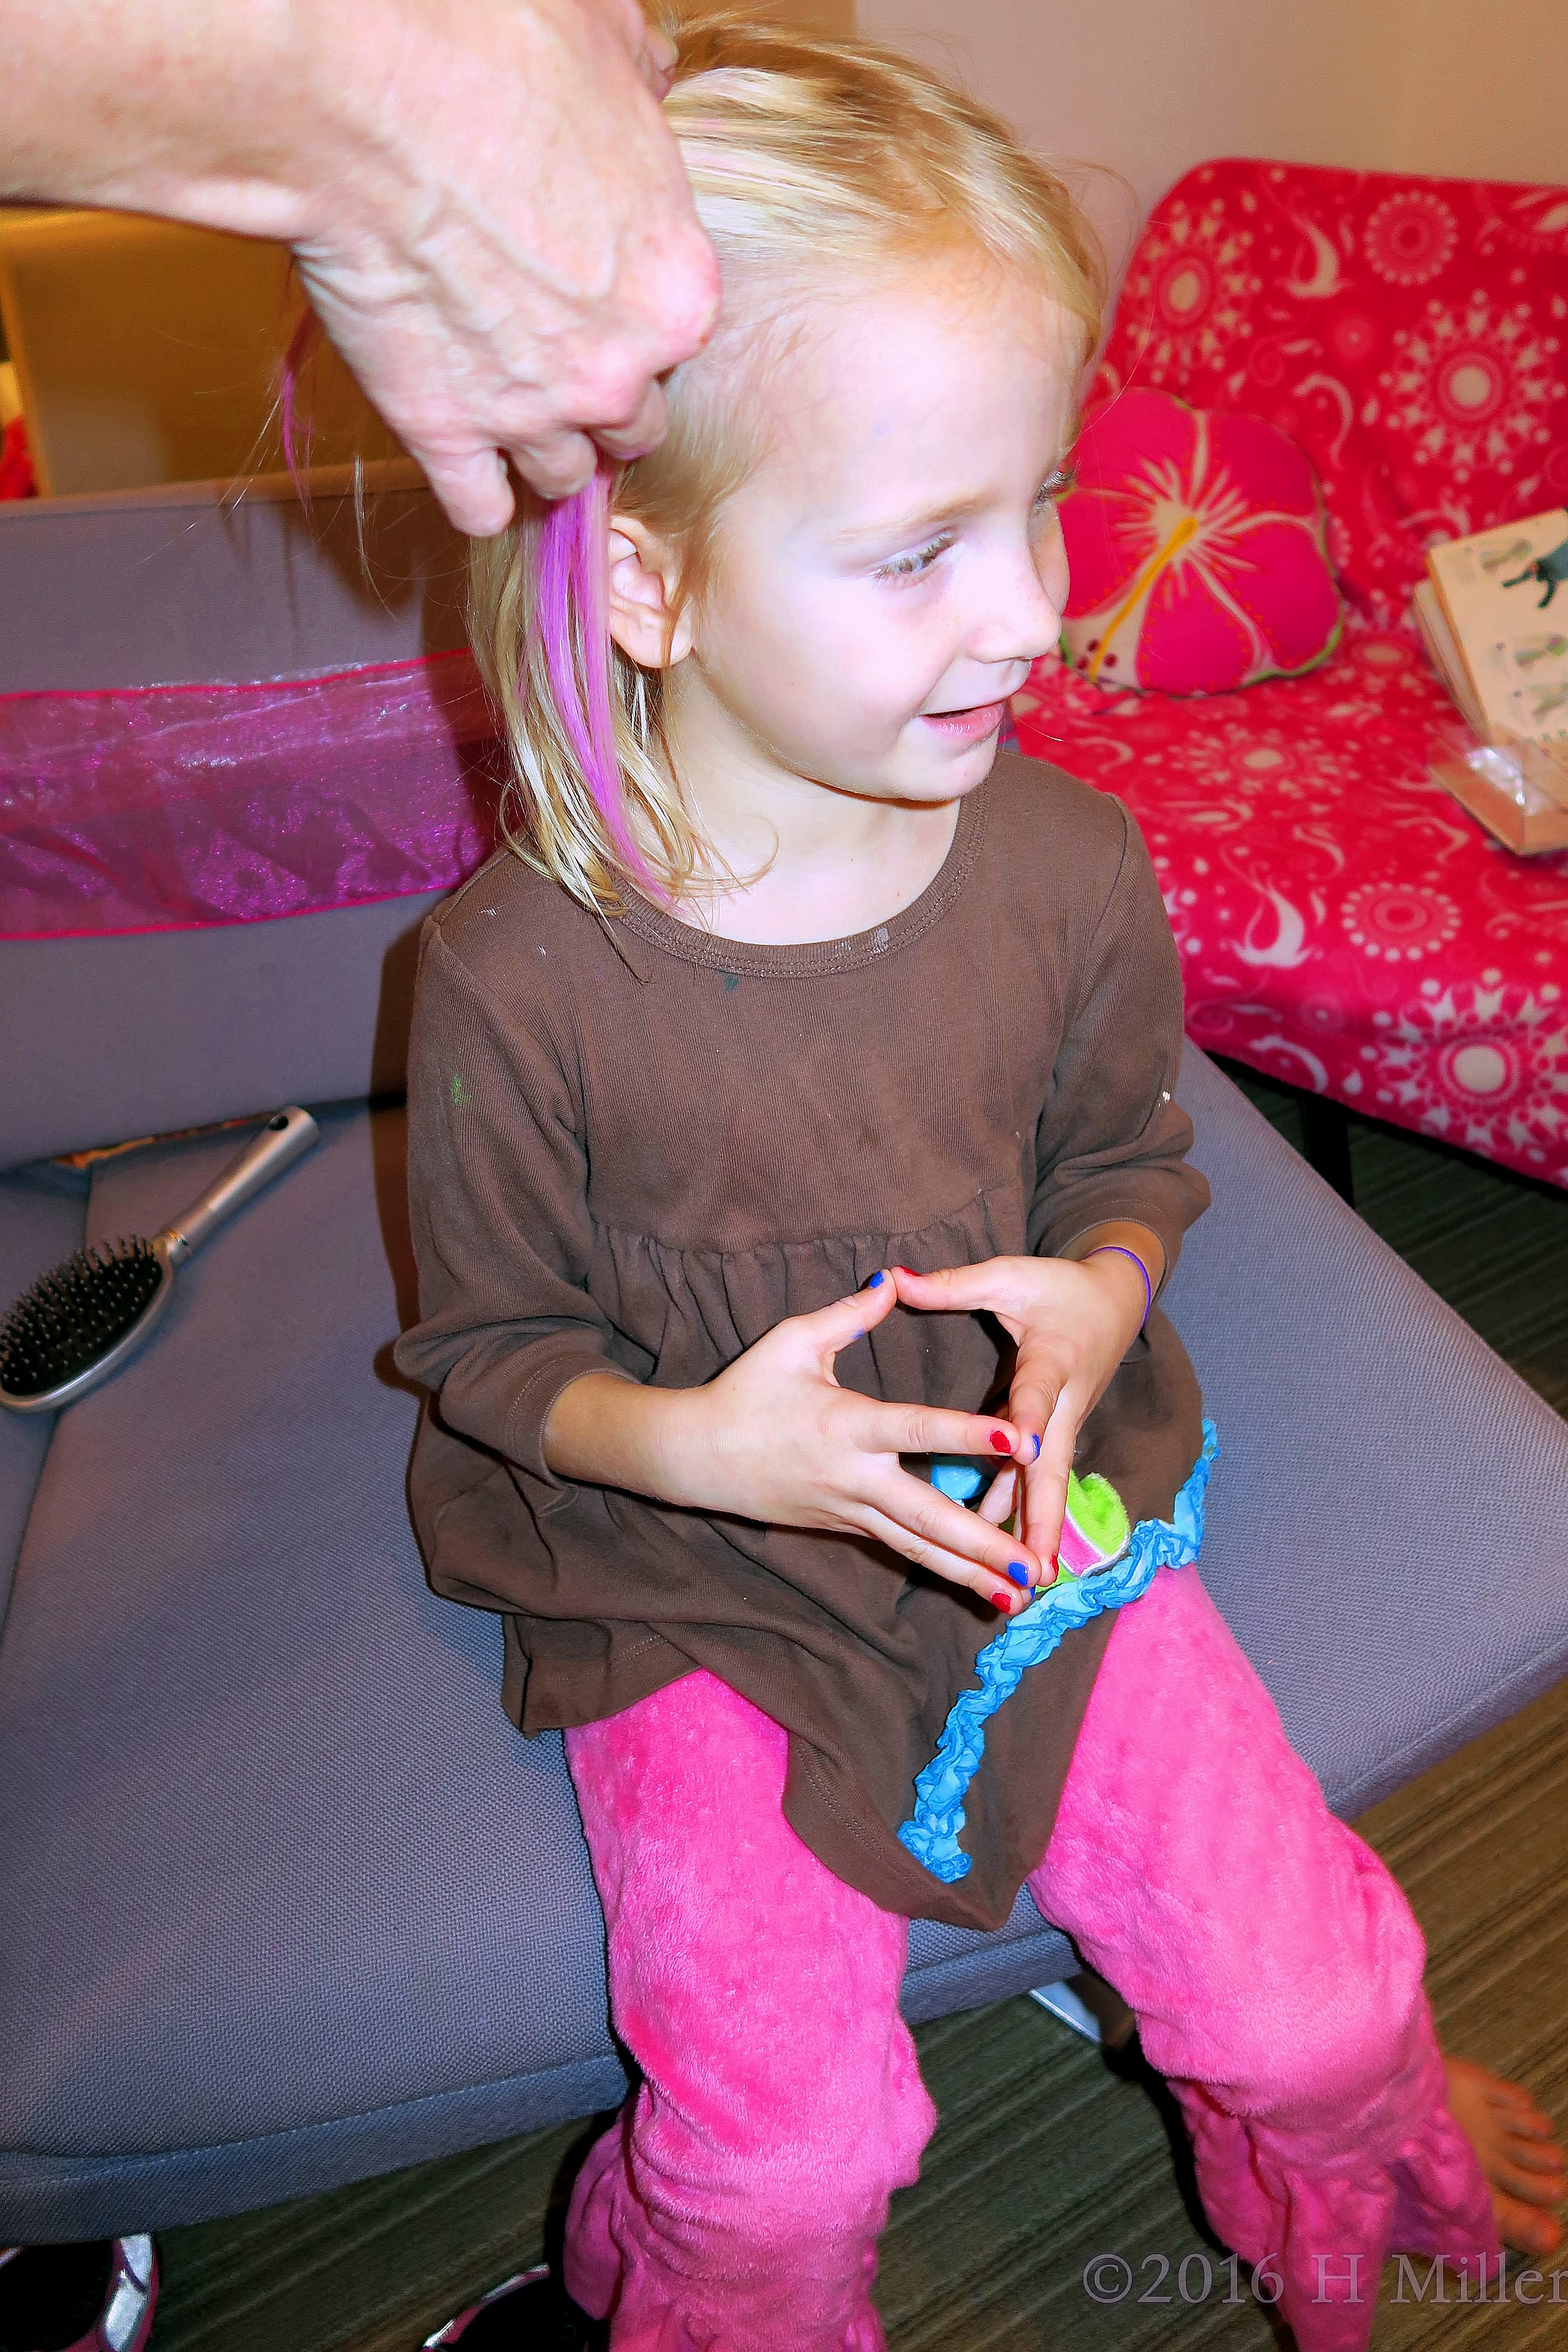 Fun Hairstyles At The Kids Spa Party. 